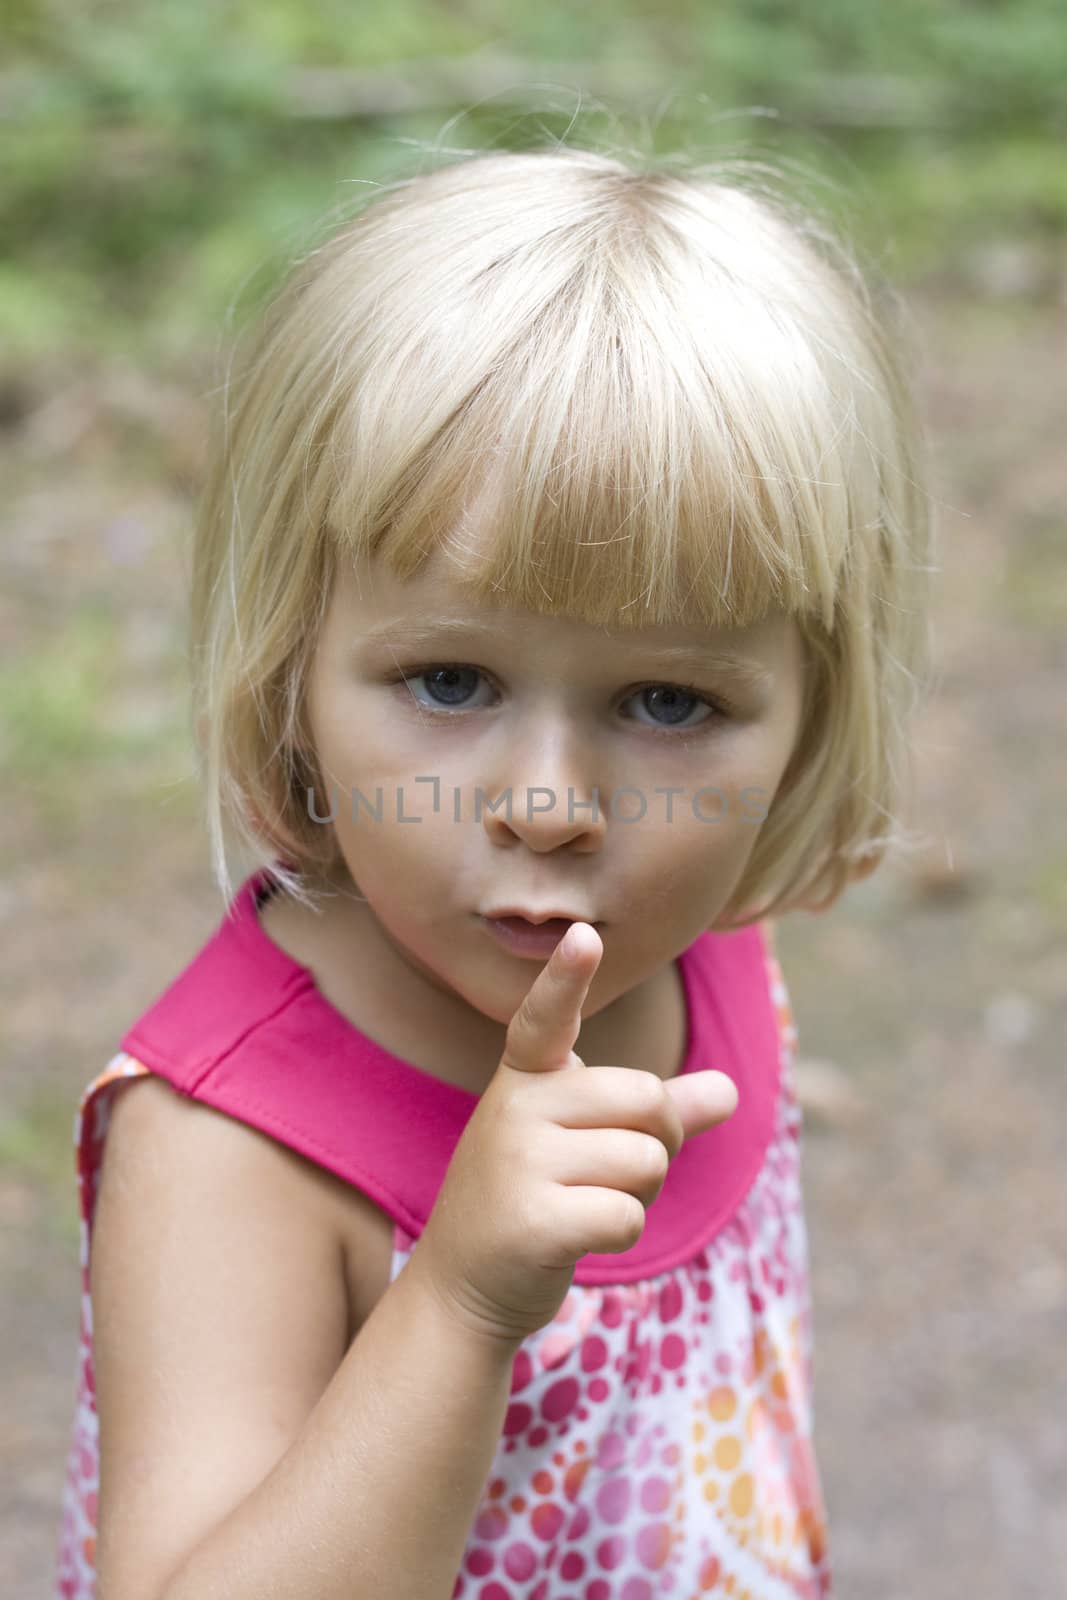 A 3 year old little girl holding up her finger for silence